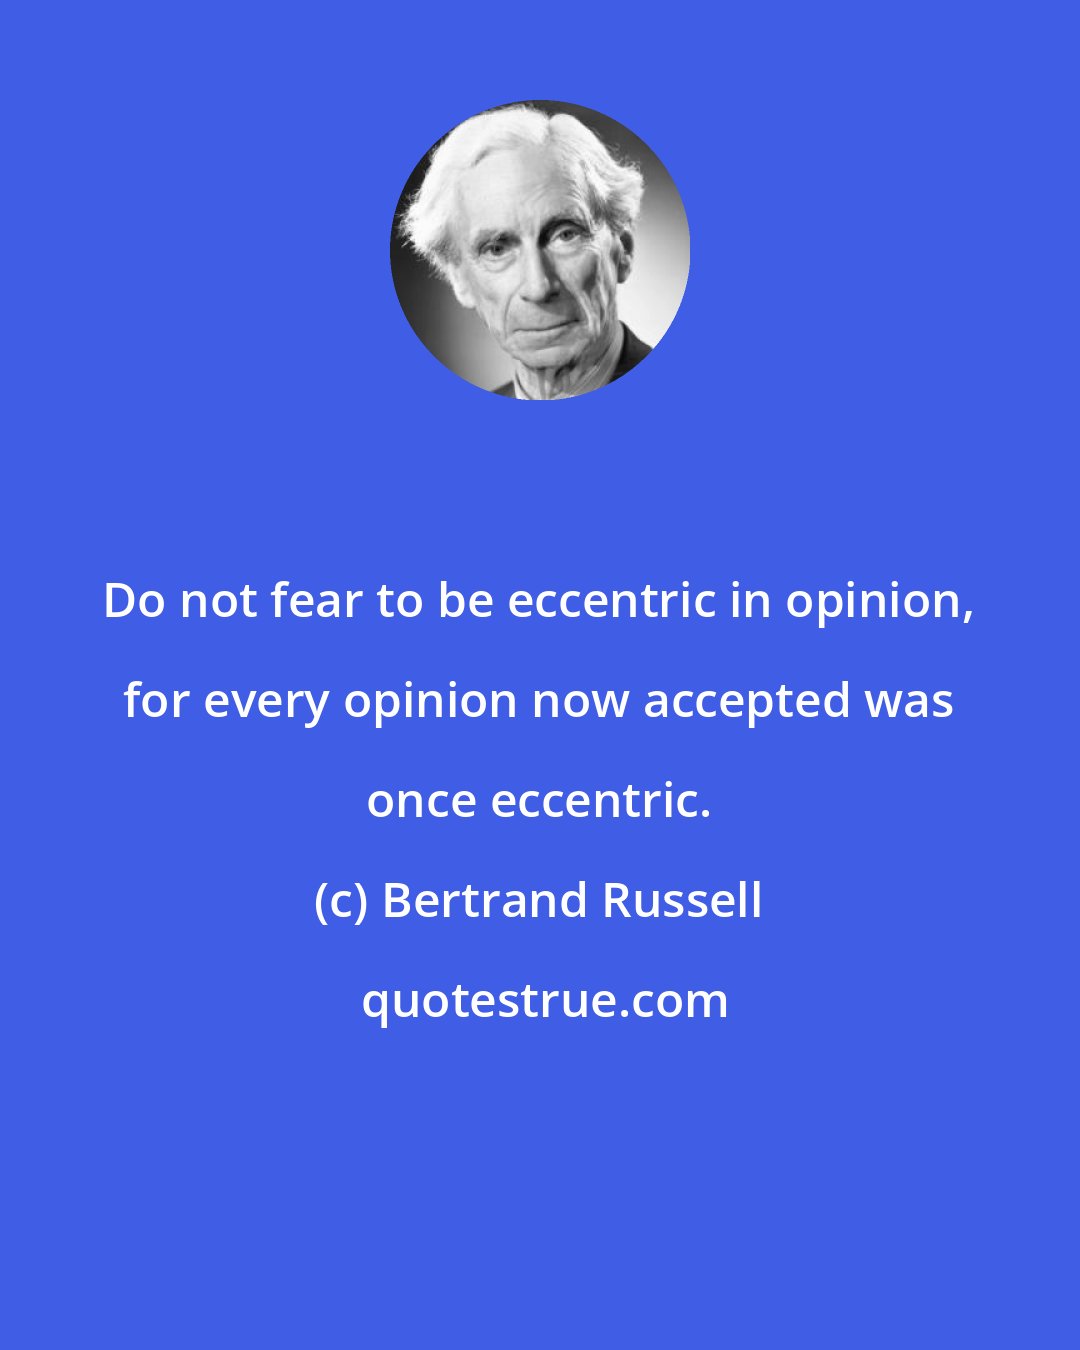 Bertrand Russell: Do not fear to be eccentric in opinion, for every opinion now accepted was once eccentric.